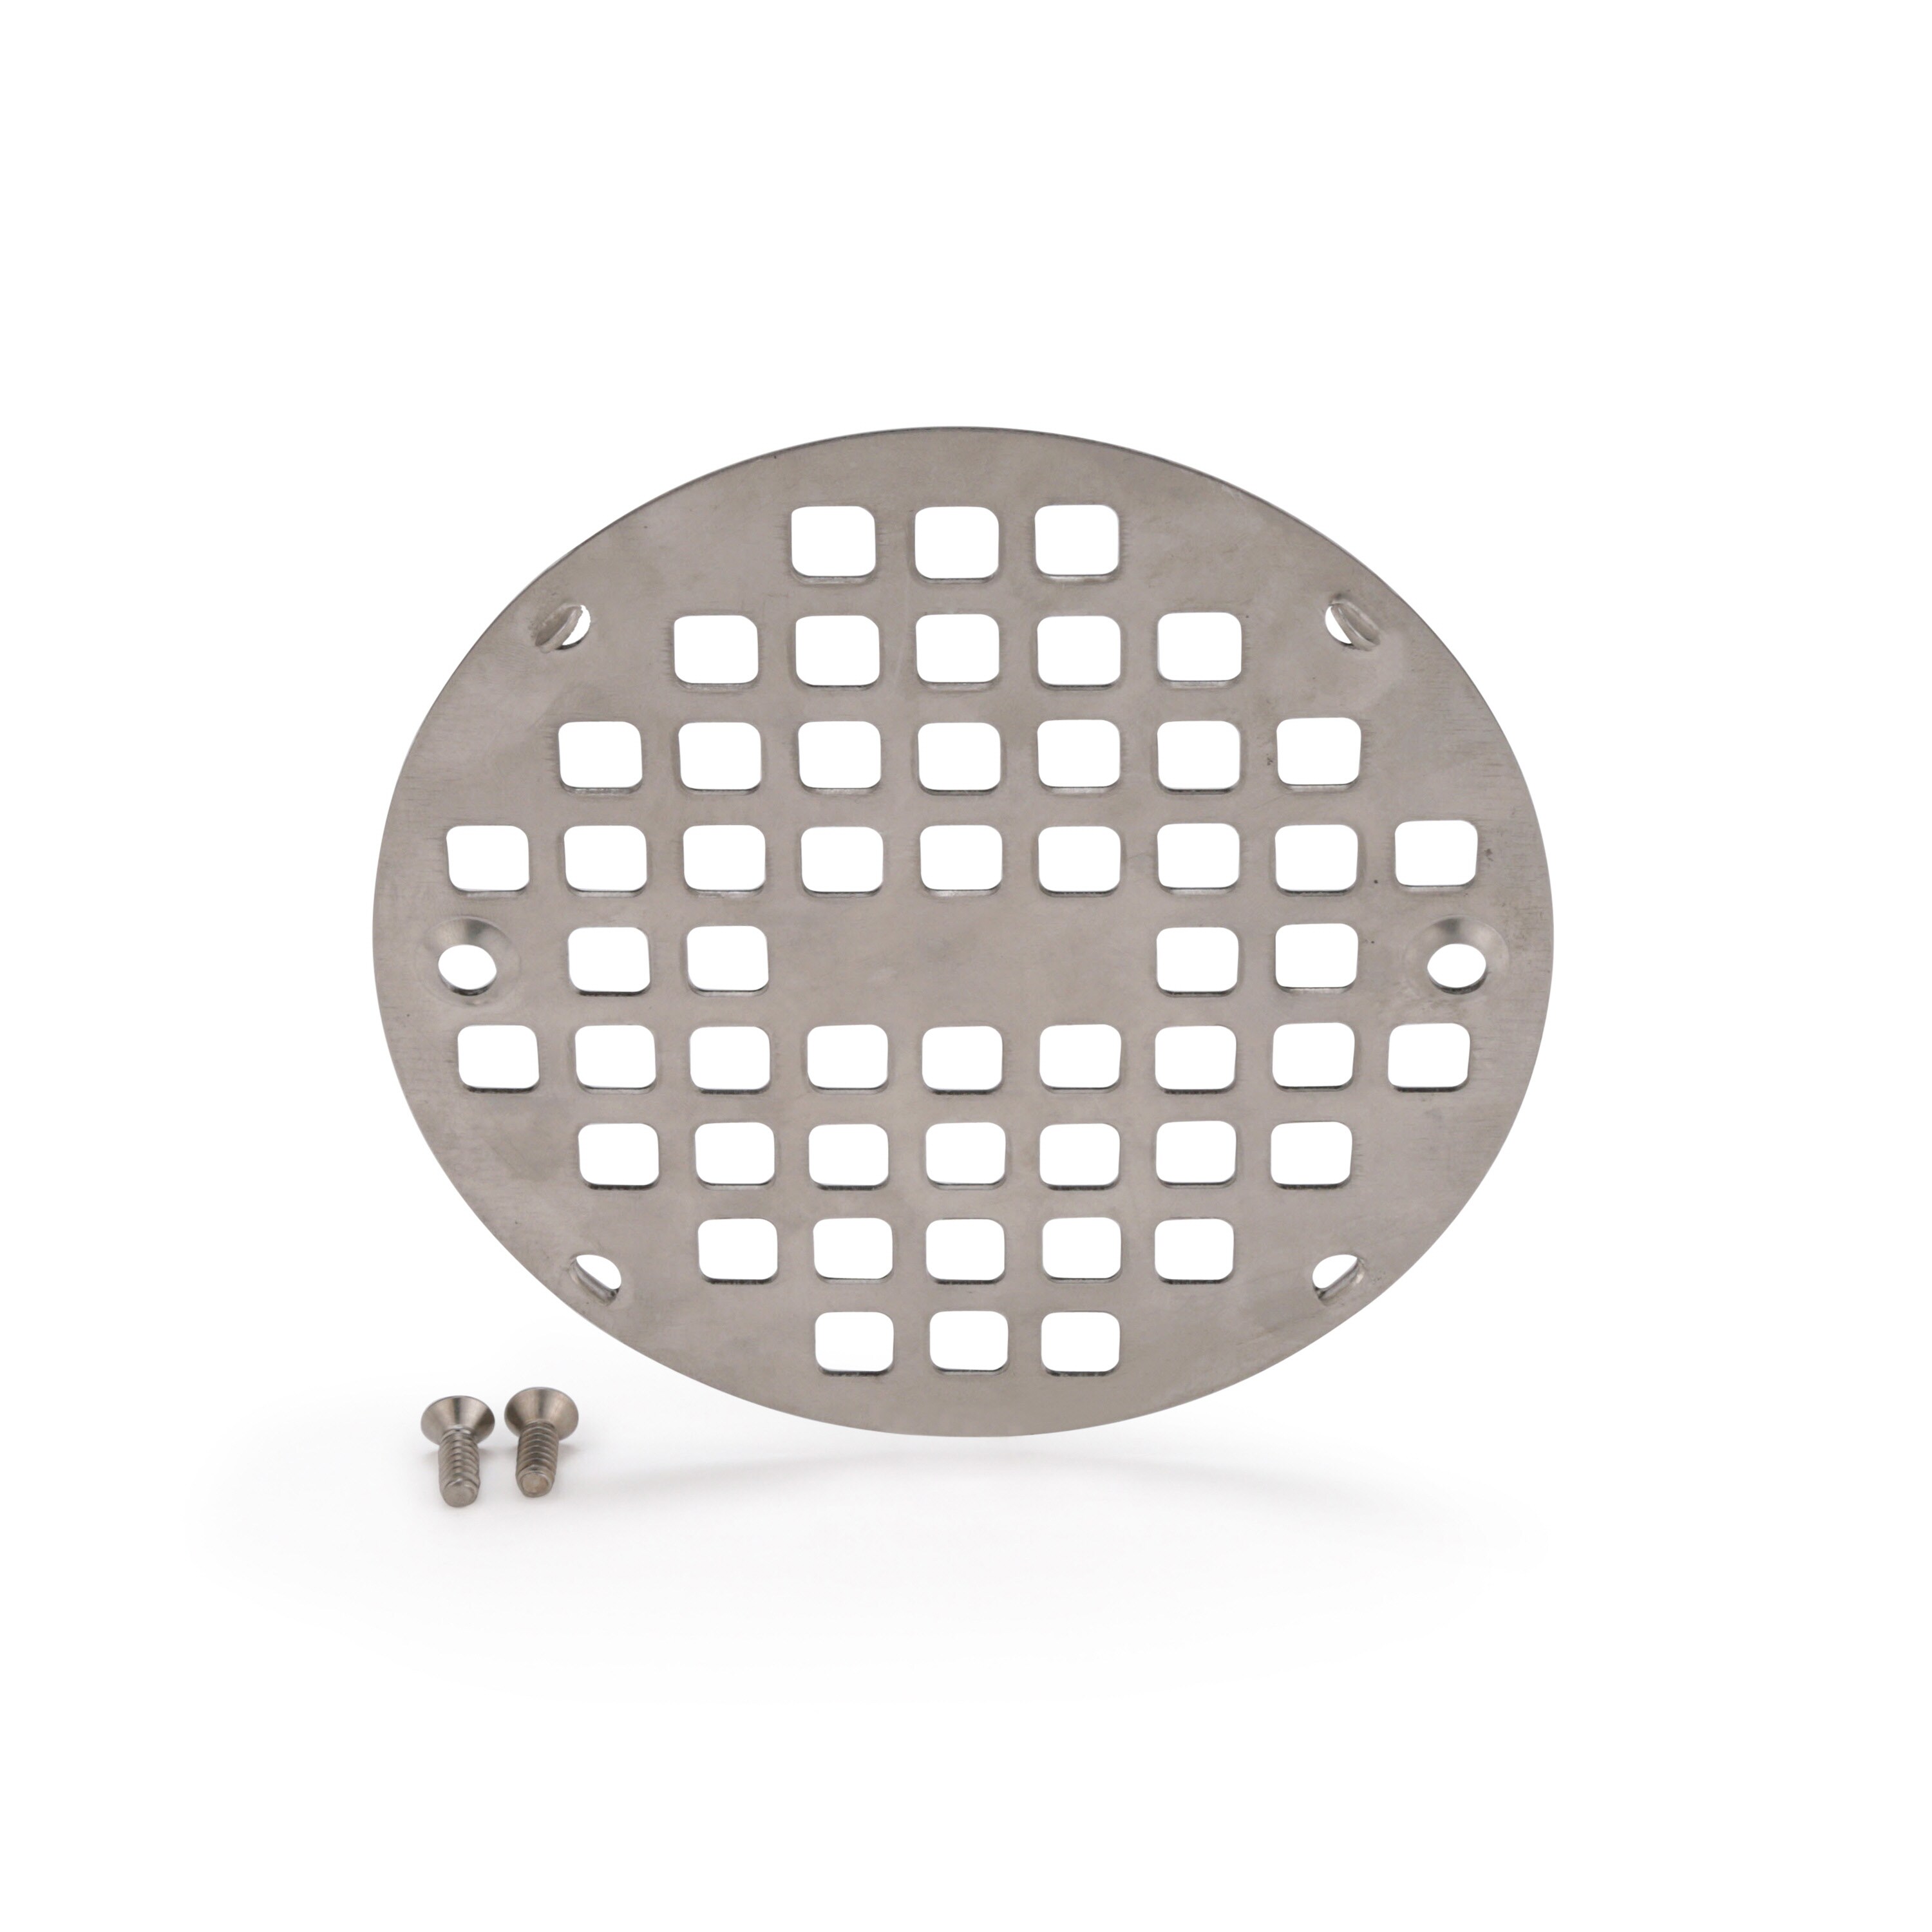 Galleria Modern 4 Round Drain Cover - Brushed Stainless